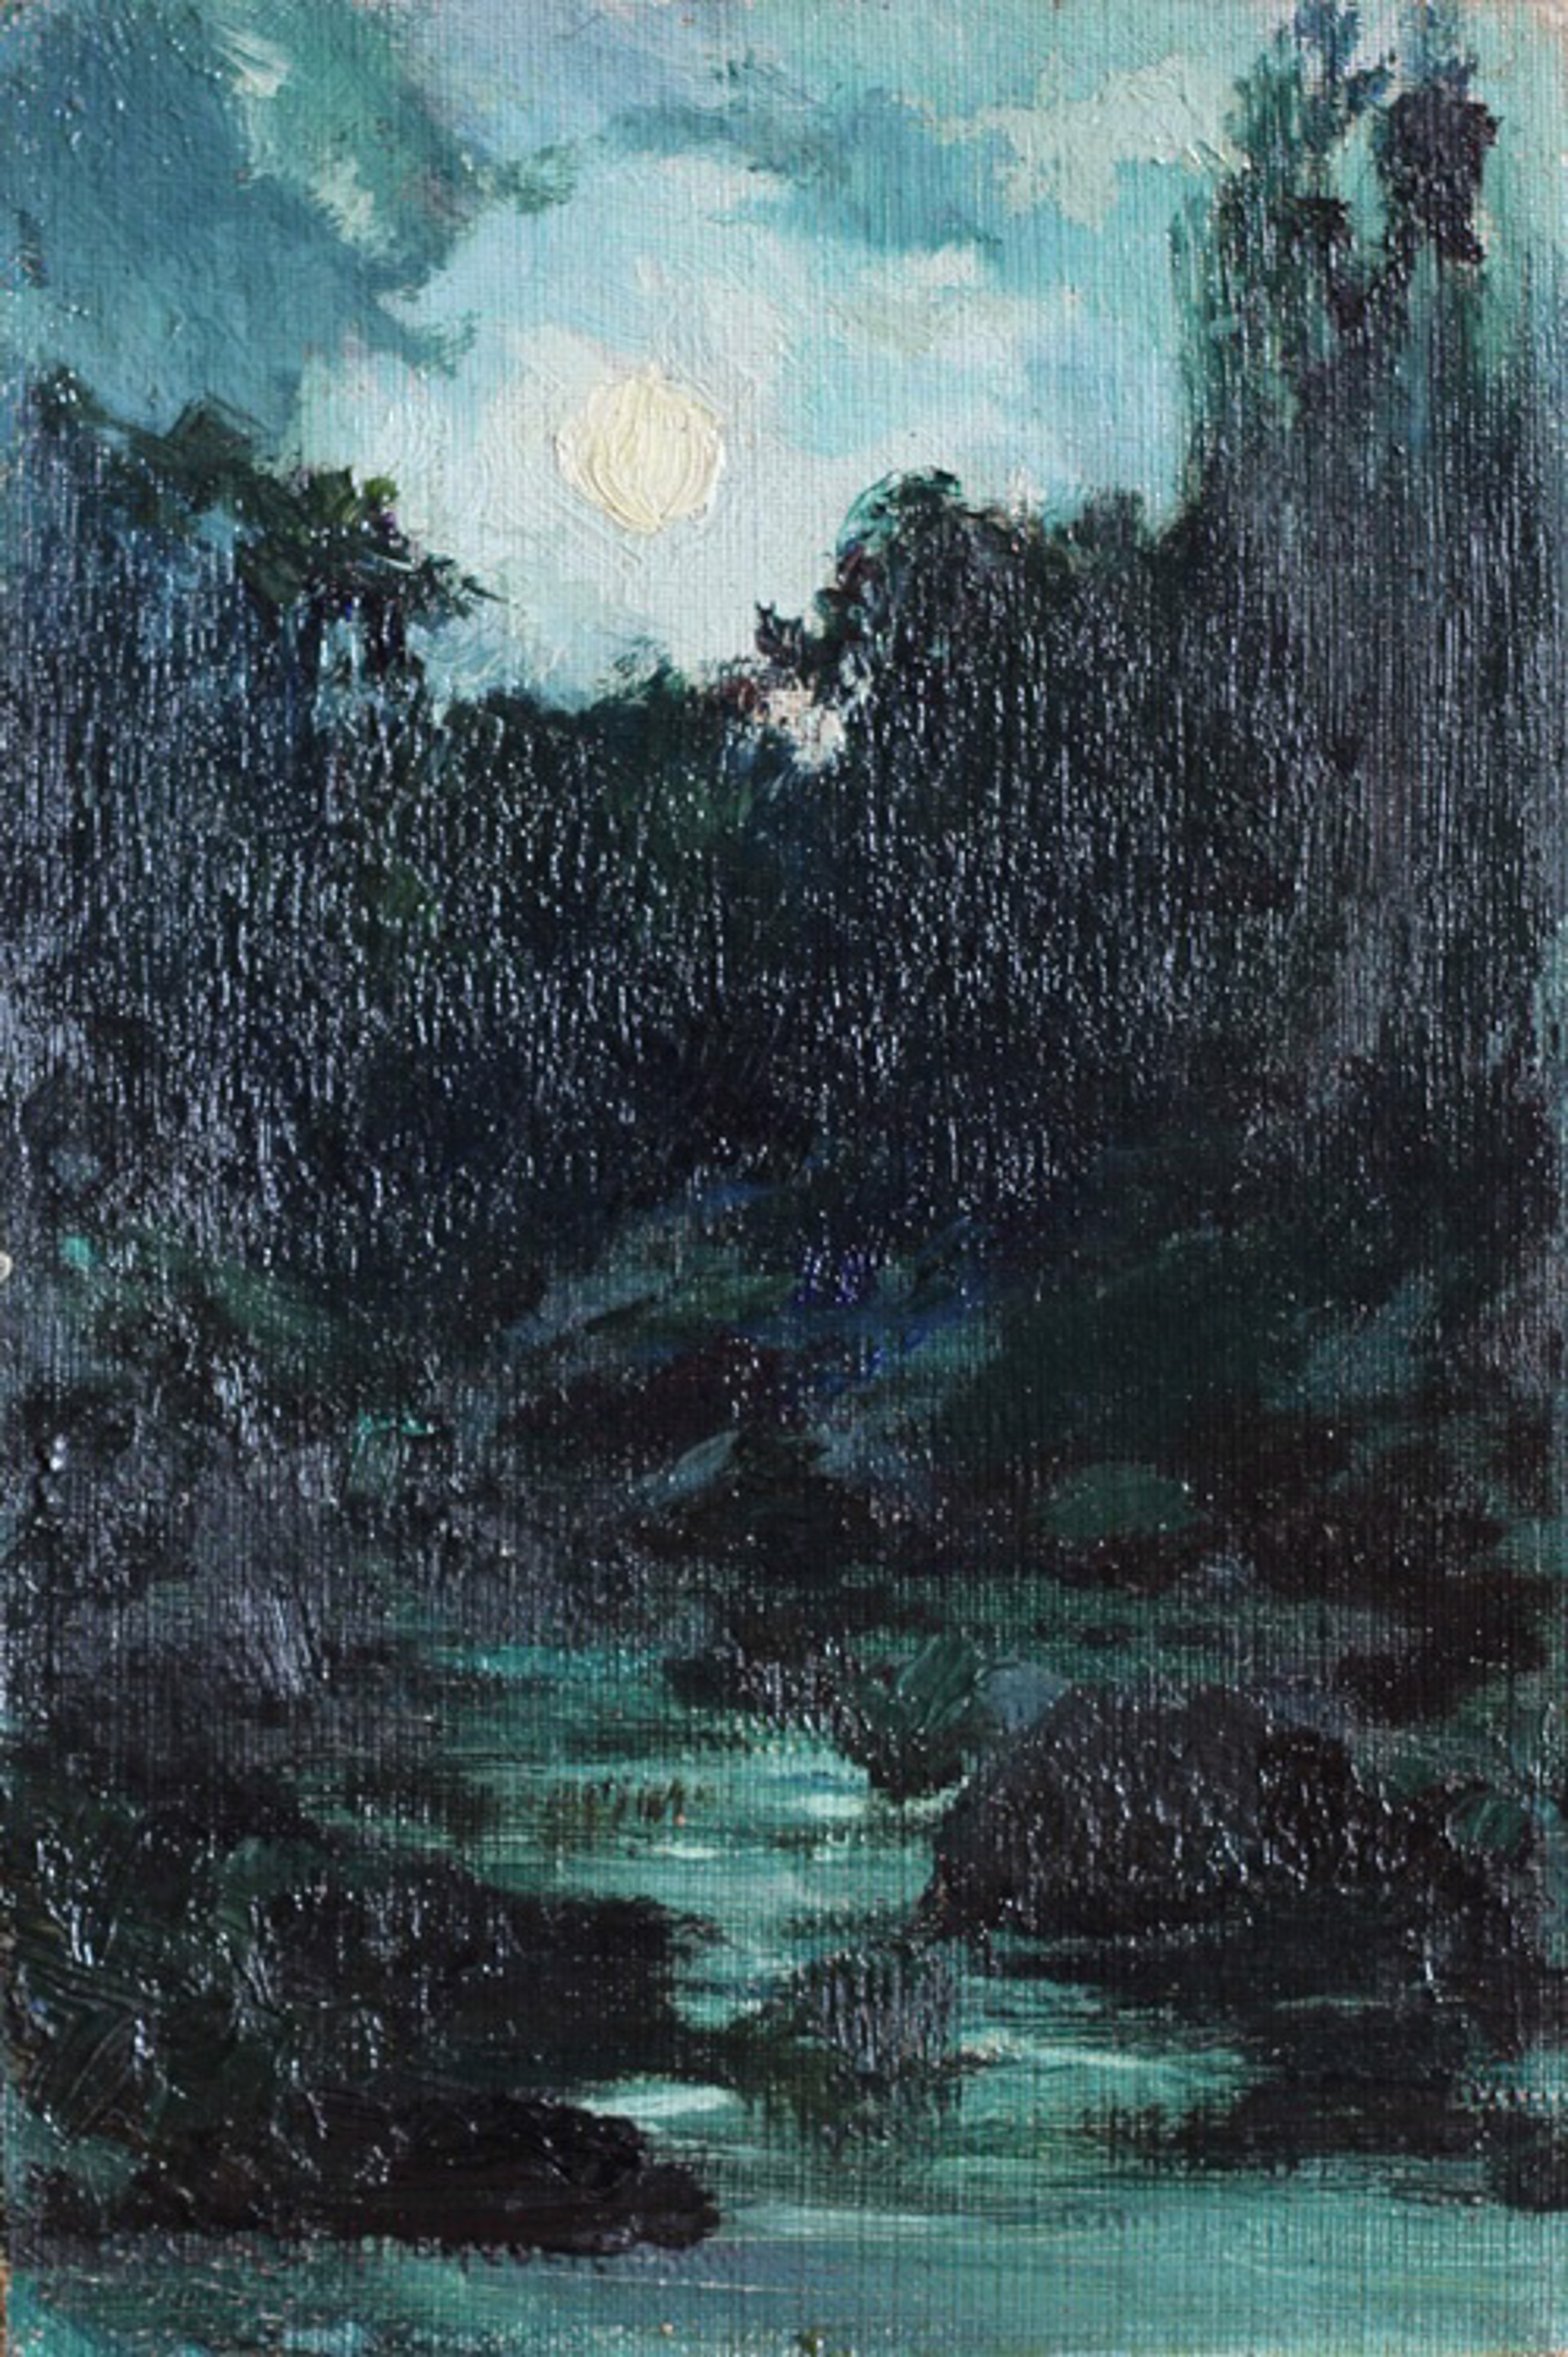 Nocturne by D. Howard Hitchcock